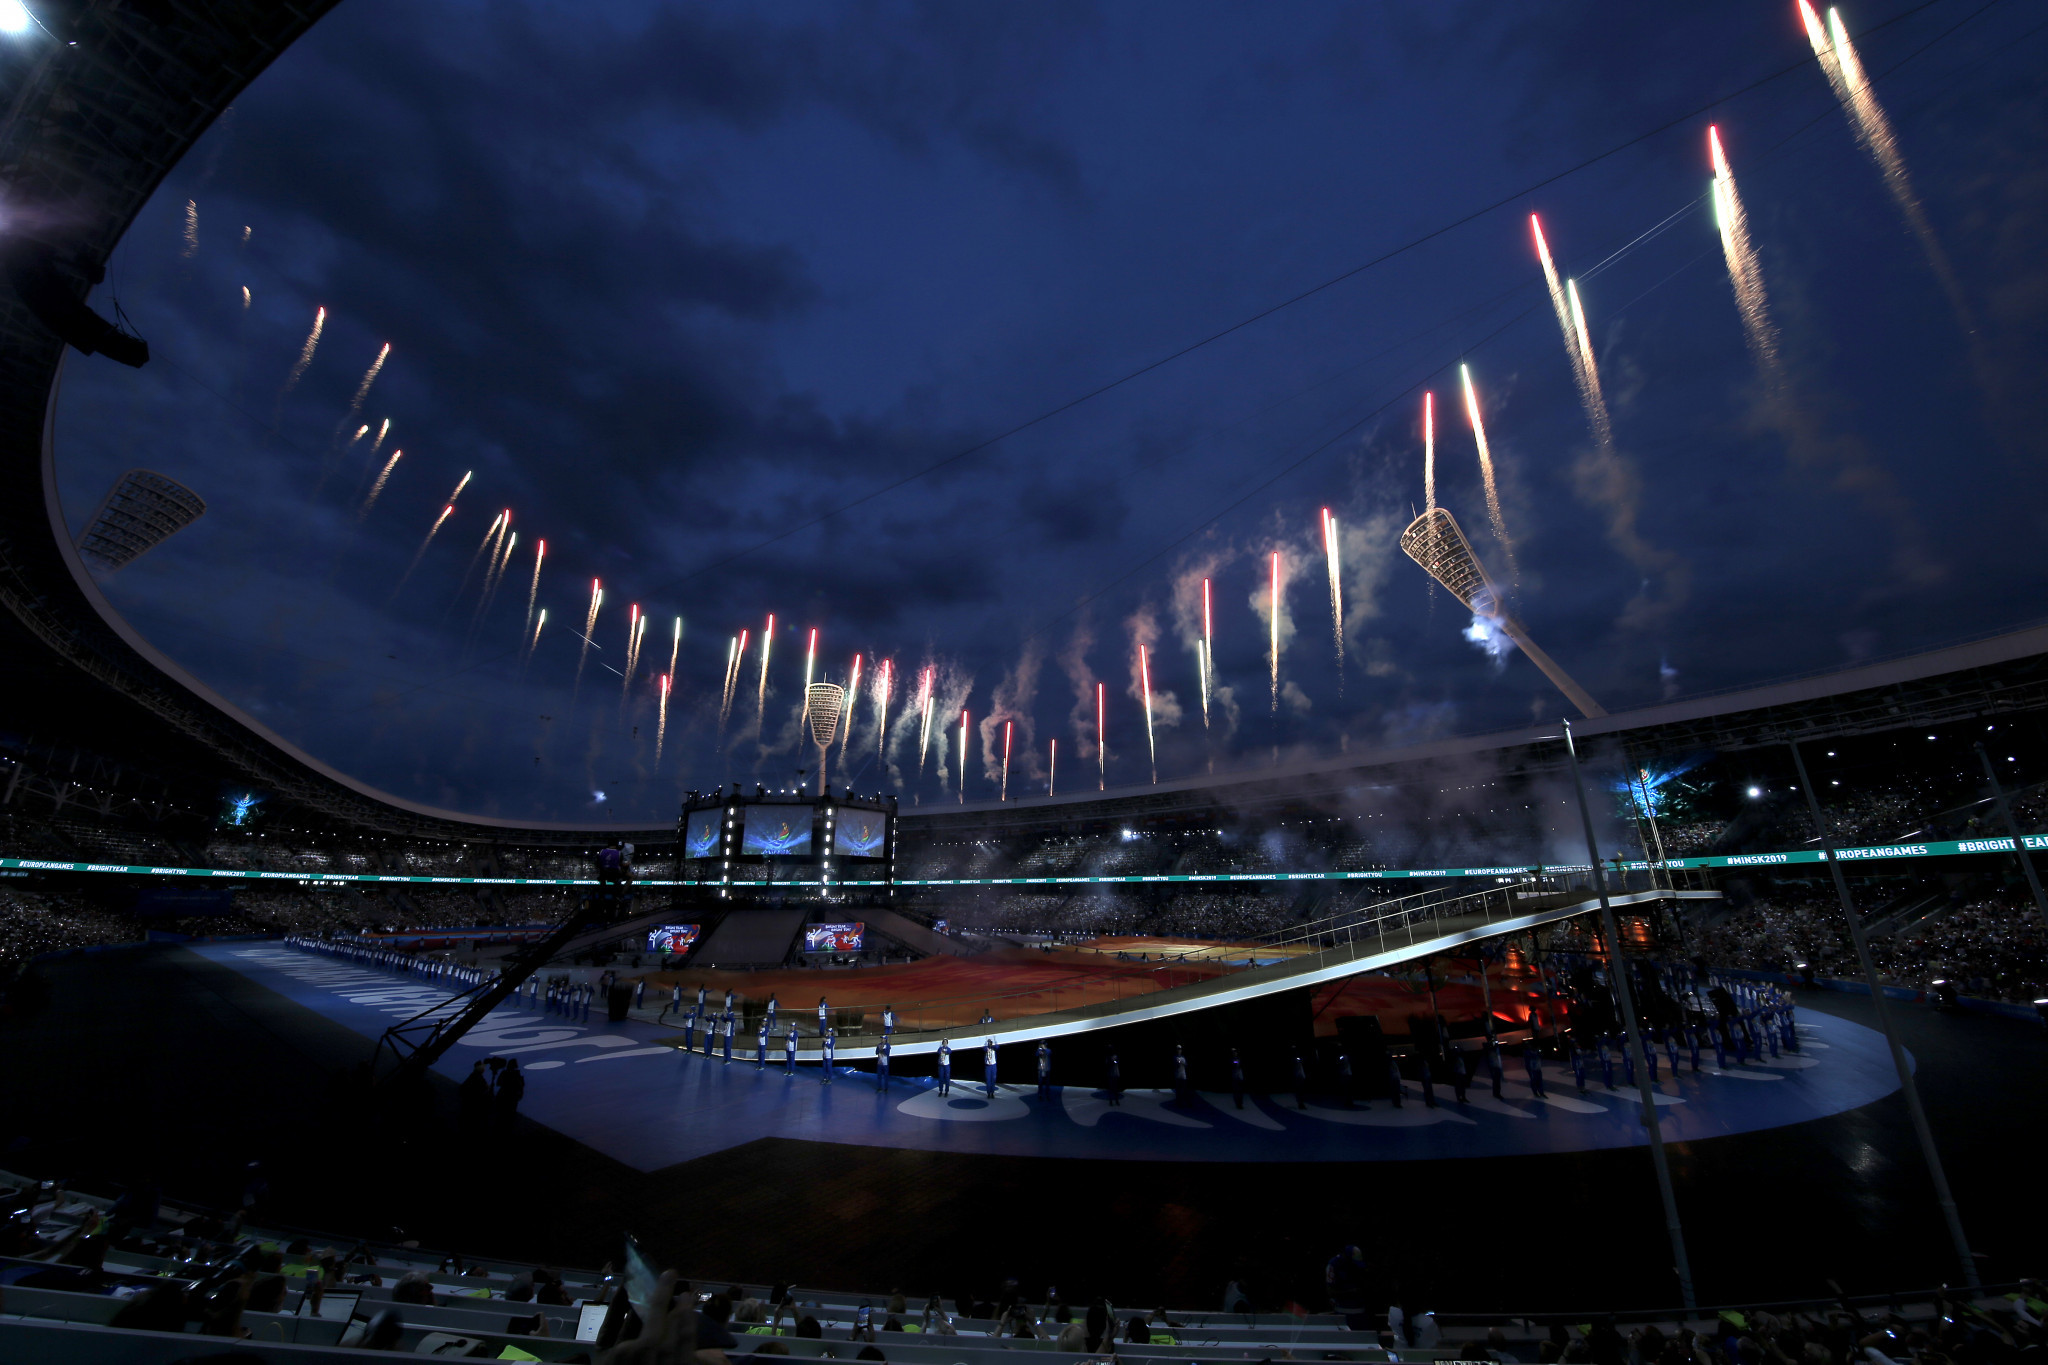 The 2019 European Games are set to conclude tomorrow, marked by a Closing Ceremony taking place at Dinamo Stadium ©Team GB